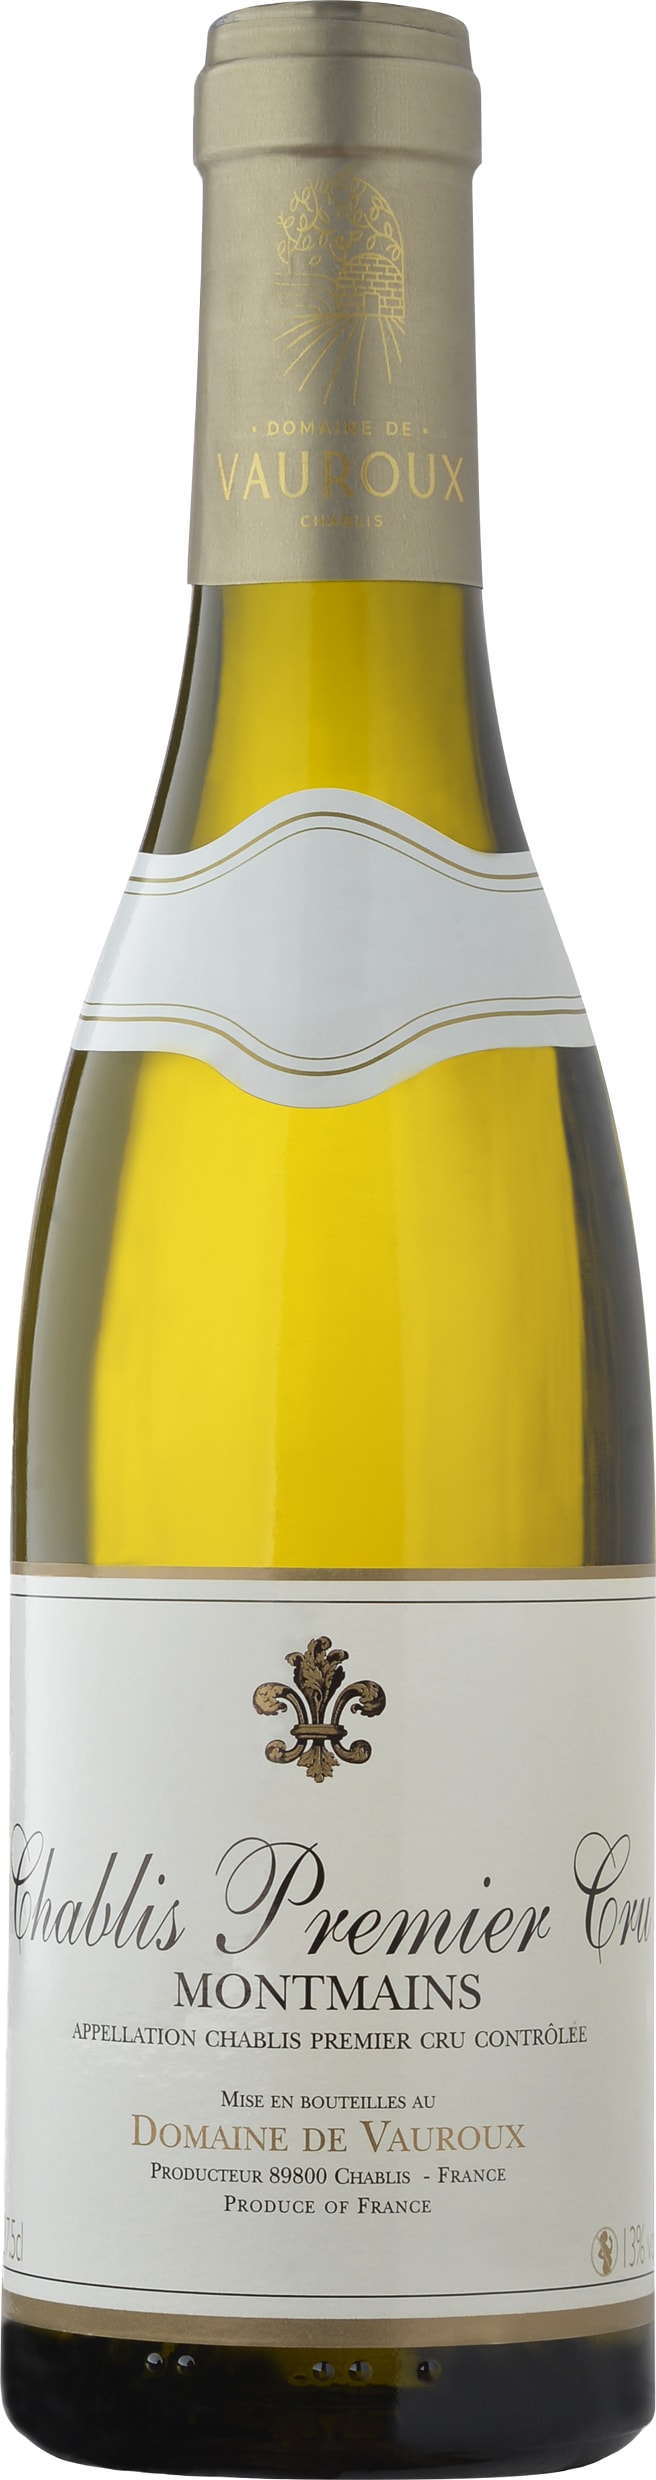 Olivier Tricon Chablis Premier Cru, half bottle 2019 37.5cl - Buy Olivier Tricon Wines from GREAT WINES DIRECT wine shop